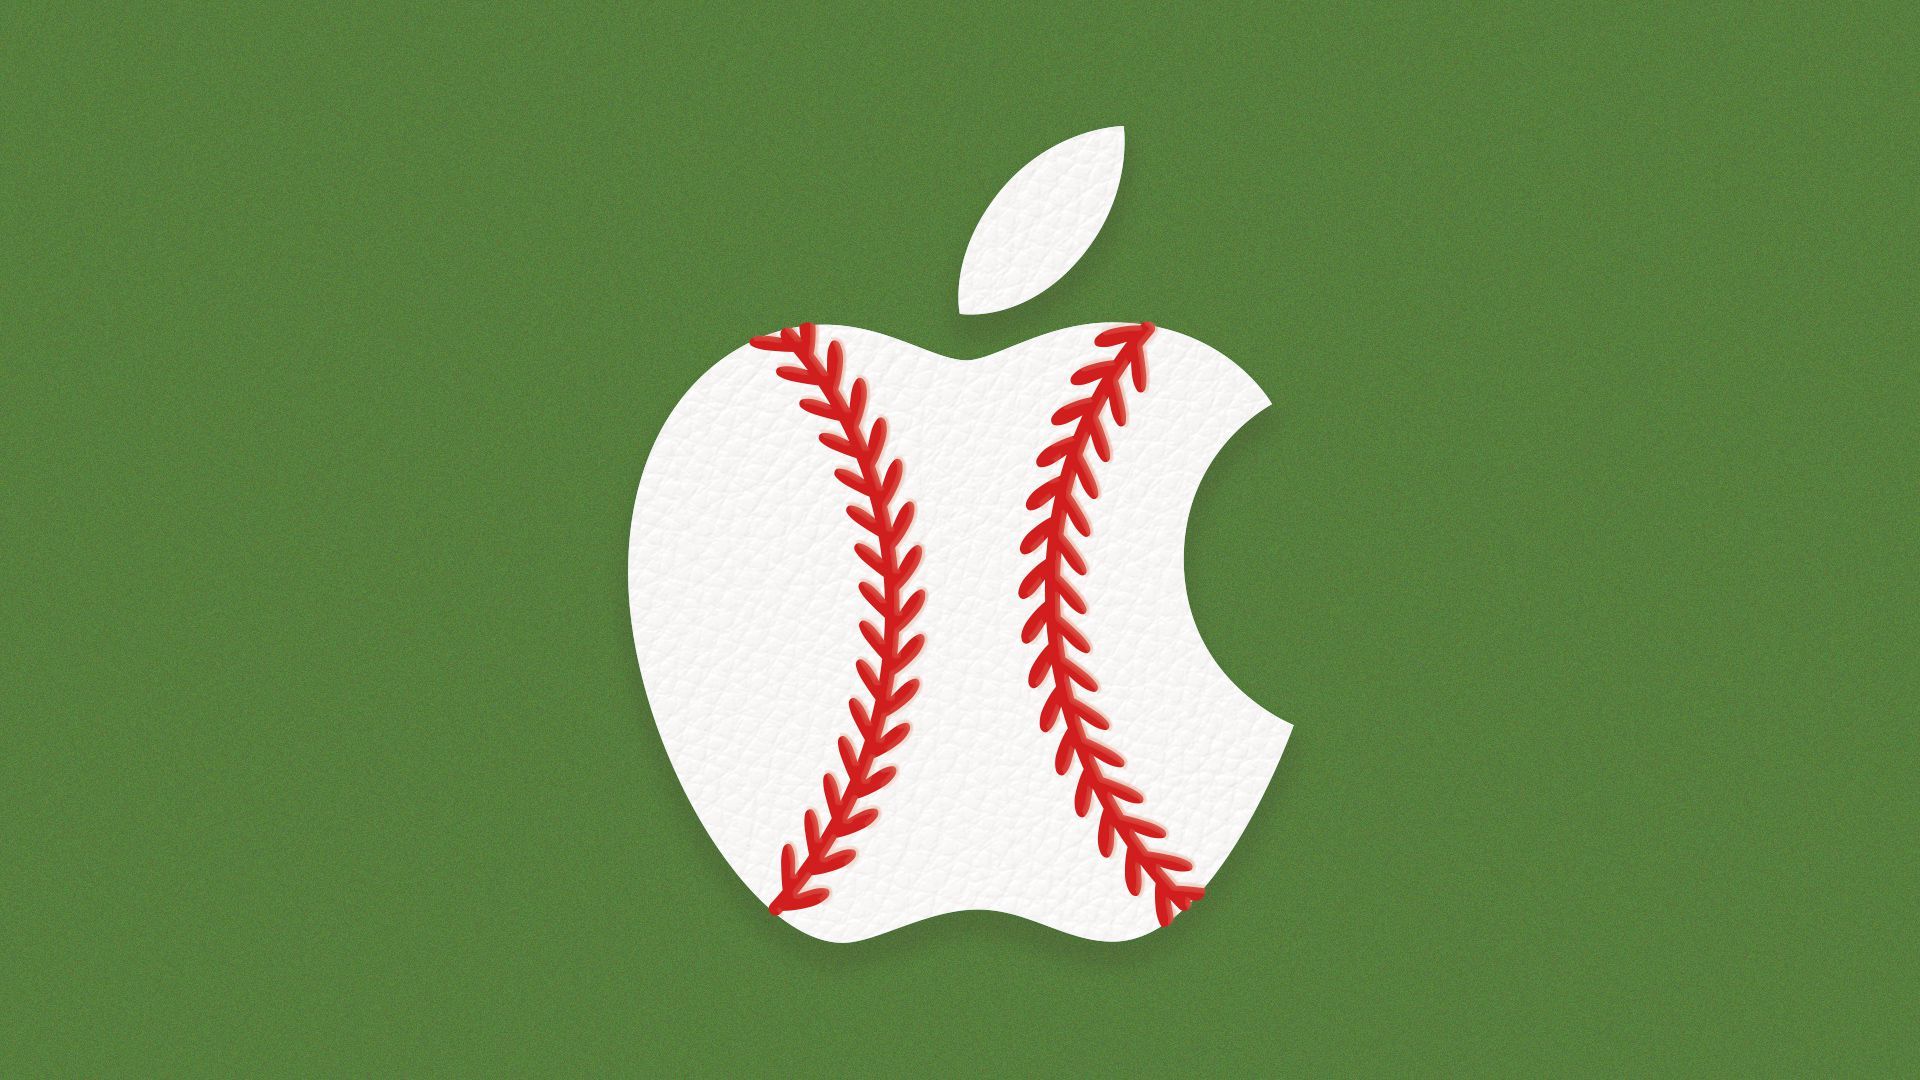 Illustration of a baseball in the shape of an Apple logo.